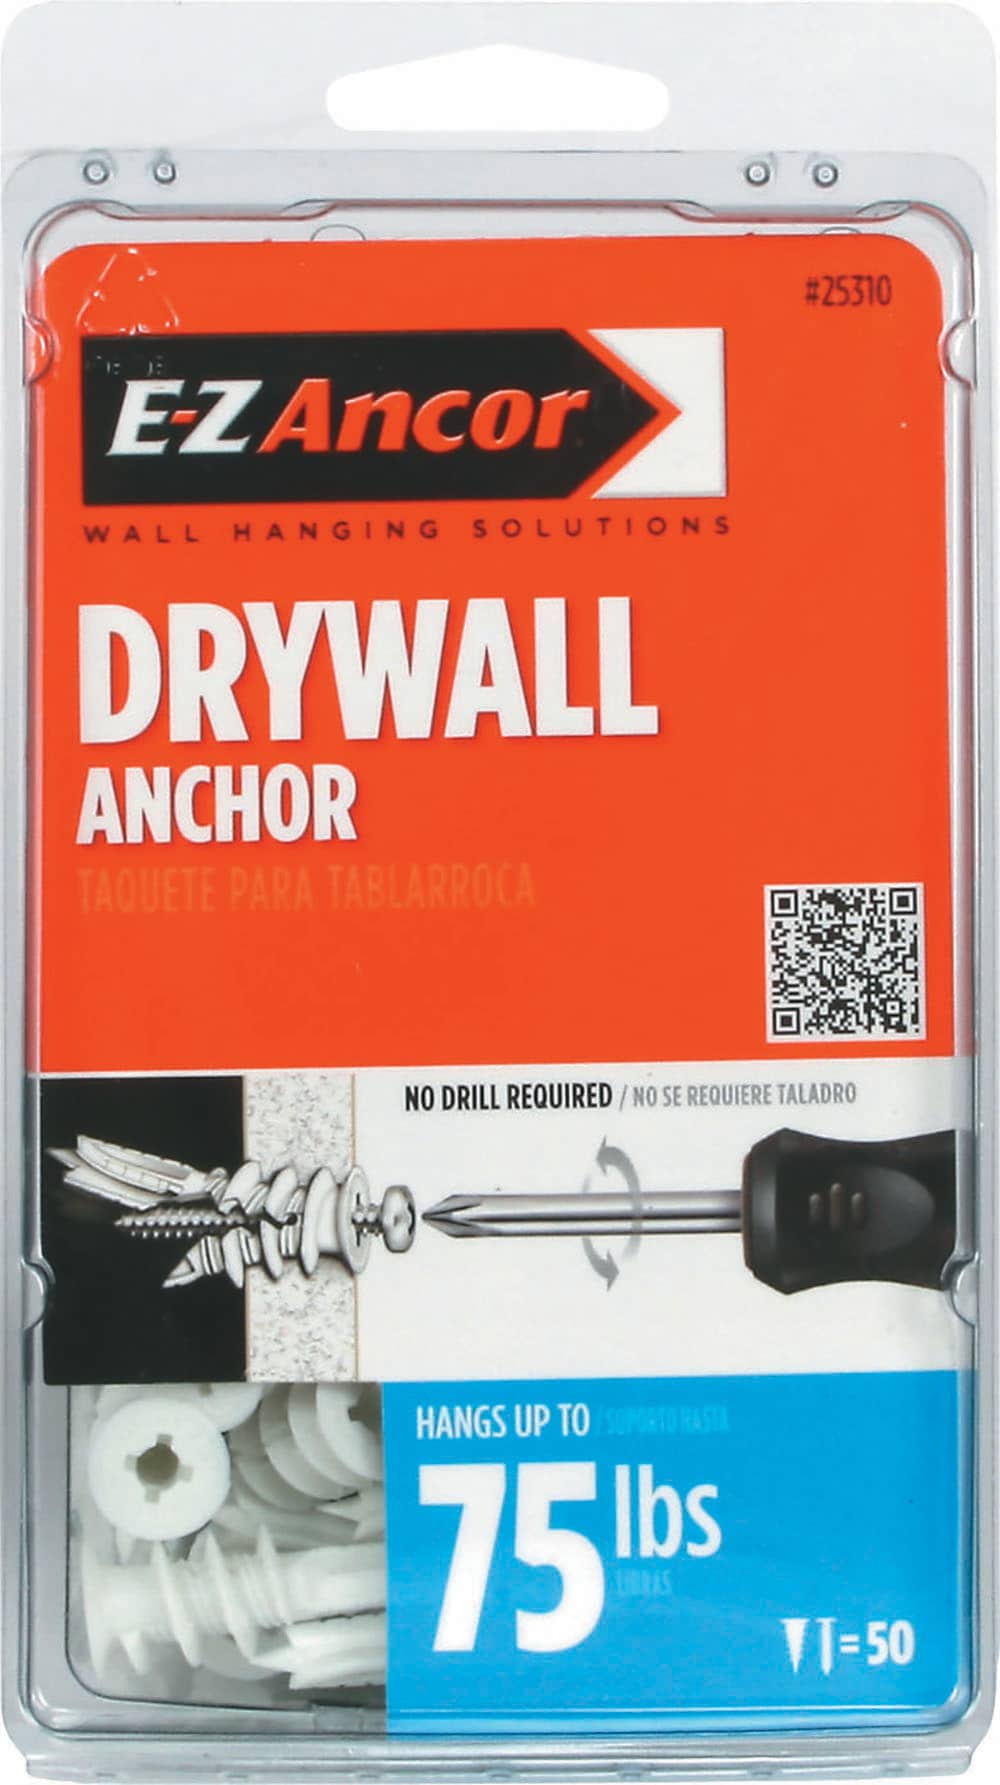 100 Pcs Metal Drywall Anchor Assorment Self Drilling Anchors With Screw kit 